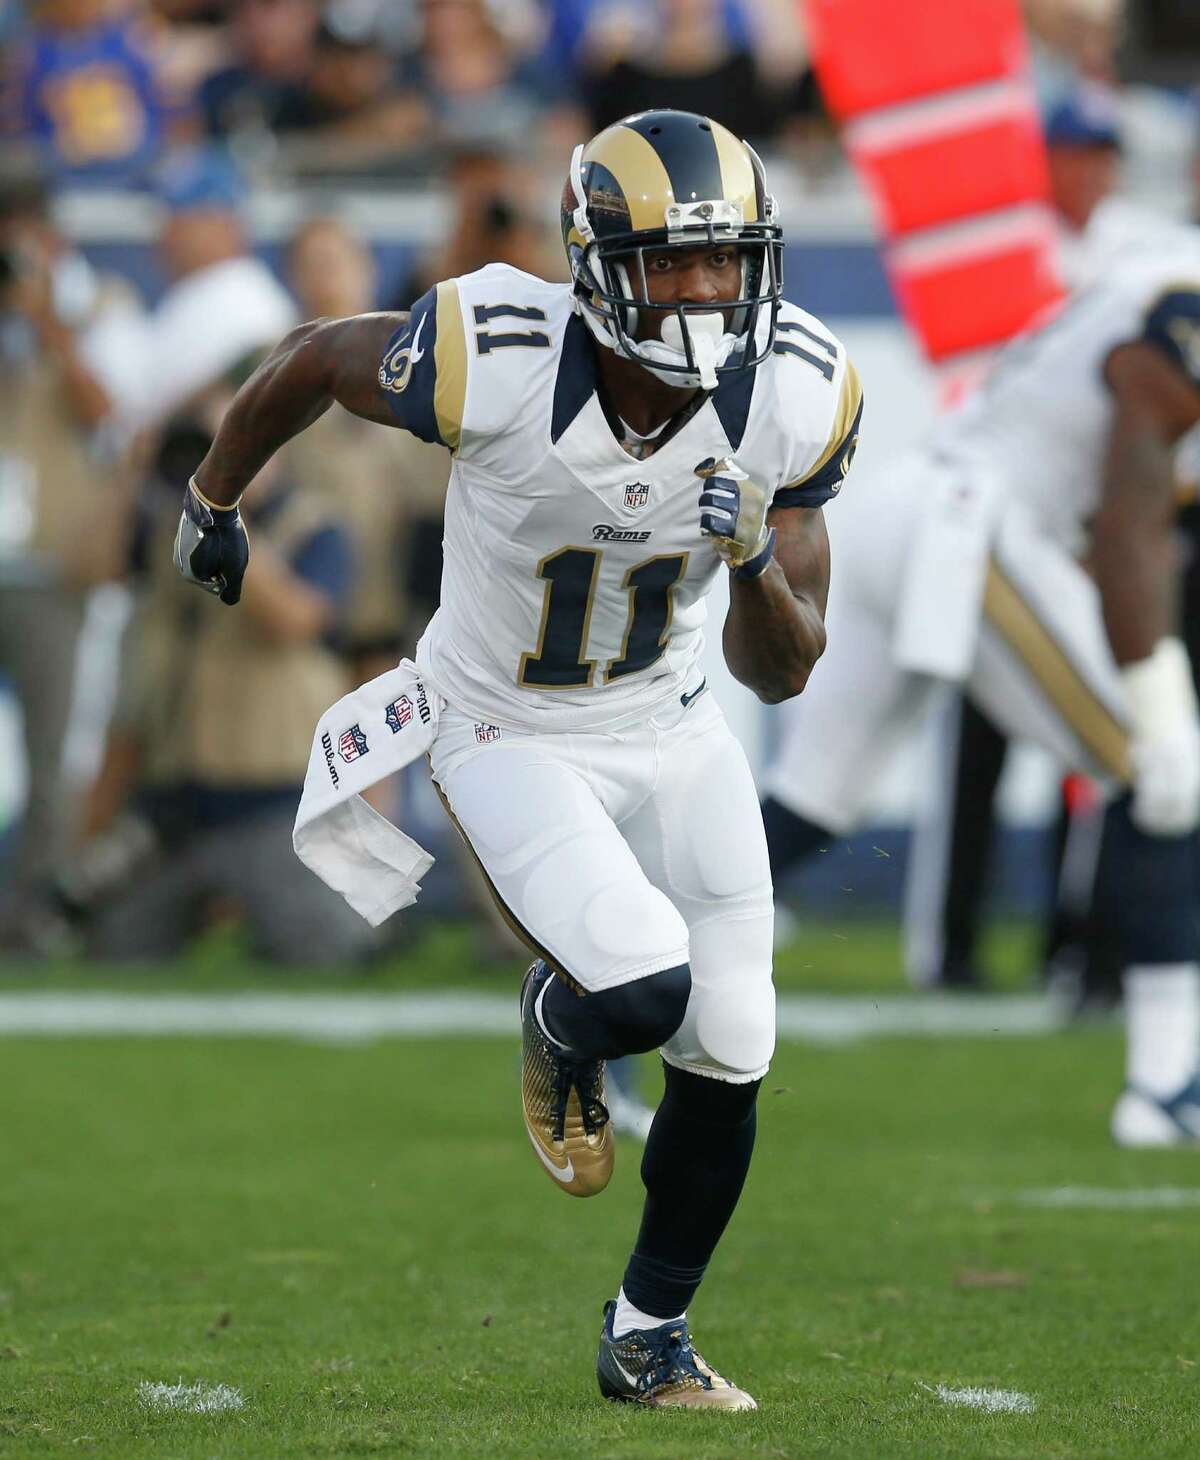 Tavon Austin, WR, Rams I'm opening myself up for ridicule with this one, but he totaled over 900 yards of offense and had nine touchdowns last season. He'll be nobody's first, second or even third option, but it looks like he finally started to find ways to contribute last year. The Rams will need to lean heavy on Todd Gurley and find ways to continue to get the ball into Austin's hands in a variety of ways. Going typically in the 11th round, you can afford to take a flyer on this guy.